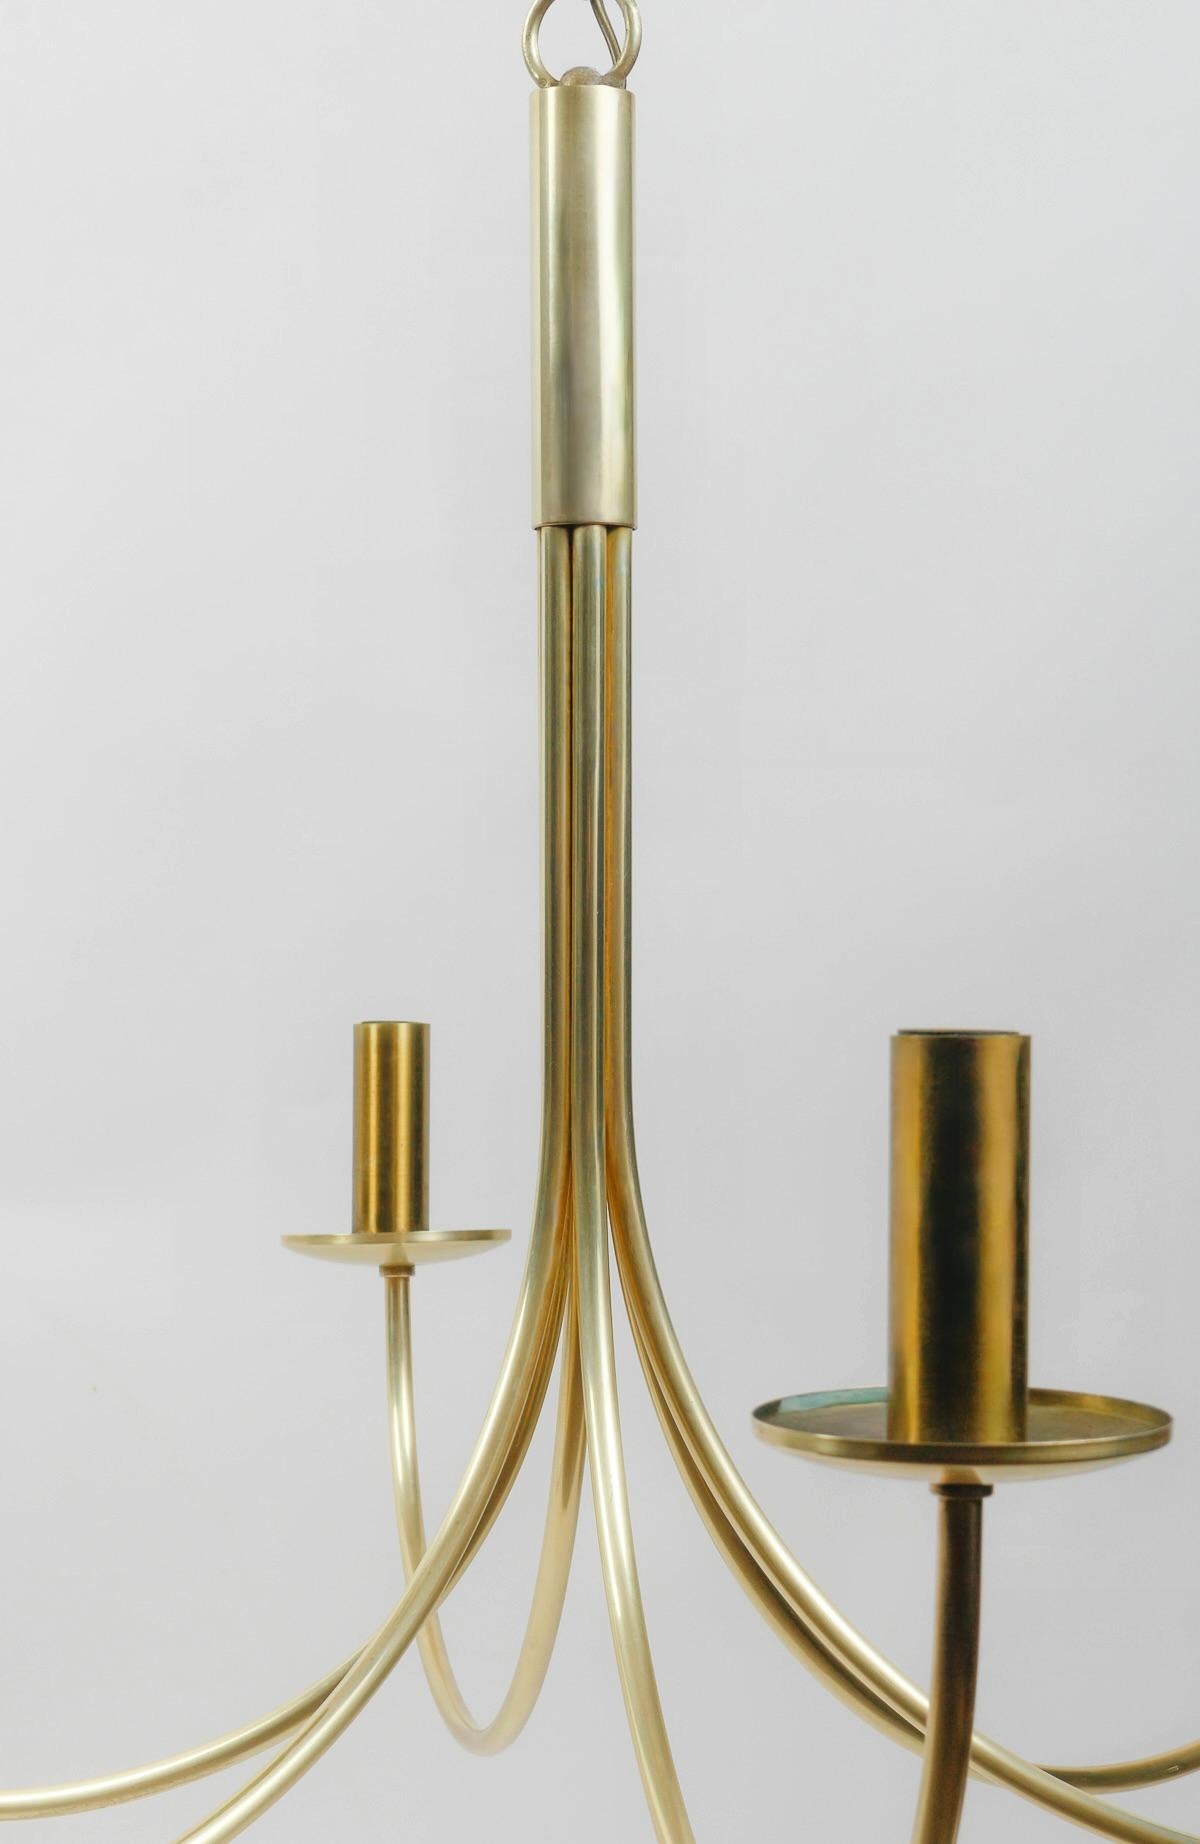 
Chic, sober 6-branch chandelier in gilded brass.
Composed of 6 round-section arms held by a gilded brass cylinder at the top of the chandelier, then flaring and rising at the bottom, and spread around the perimeter of the chandelier.
At each end of